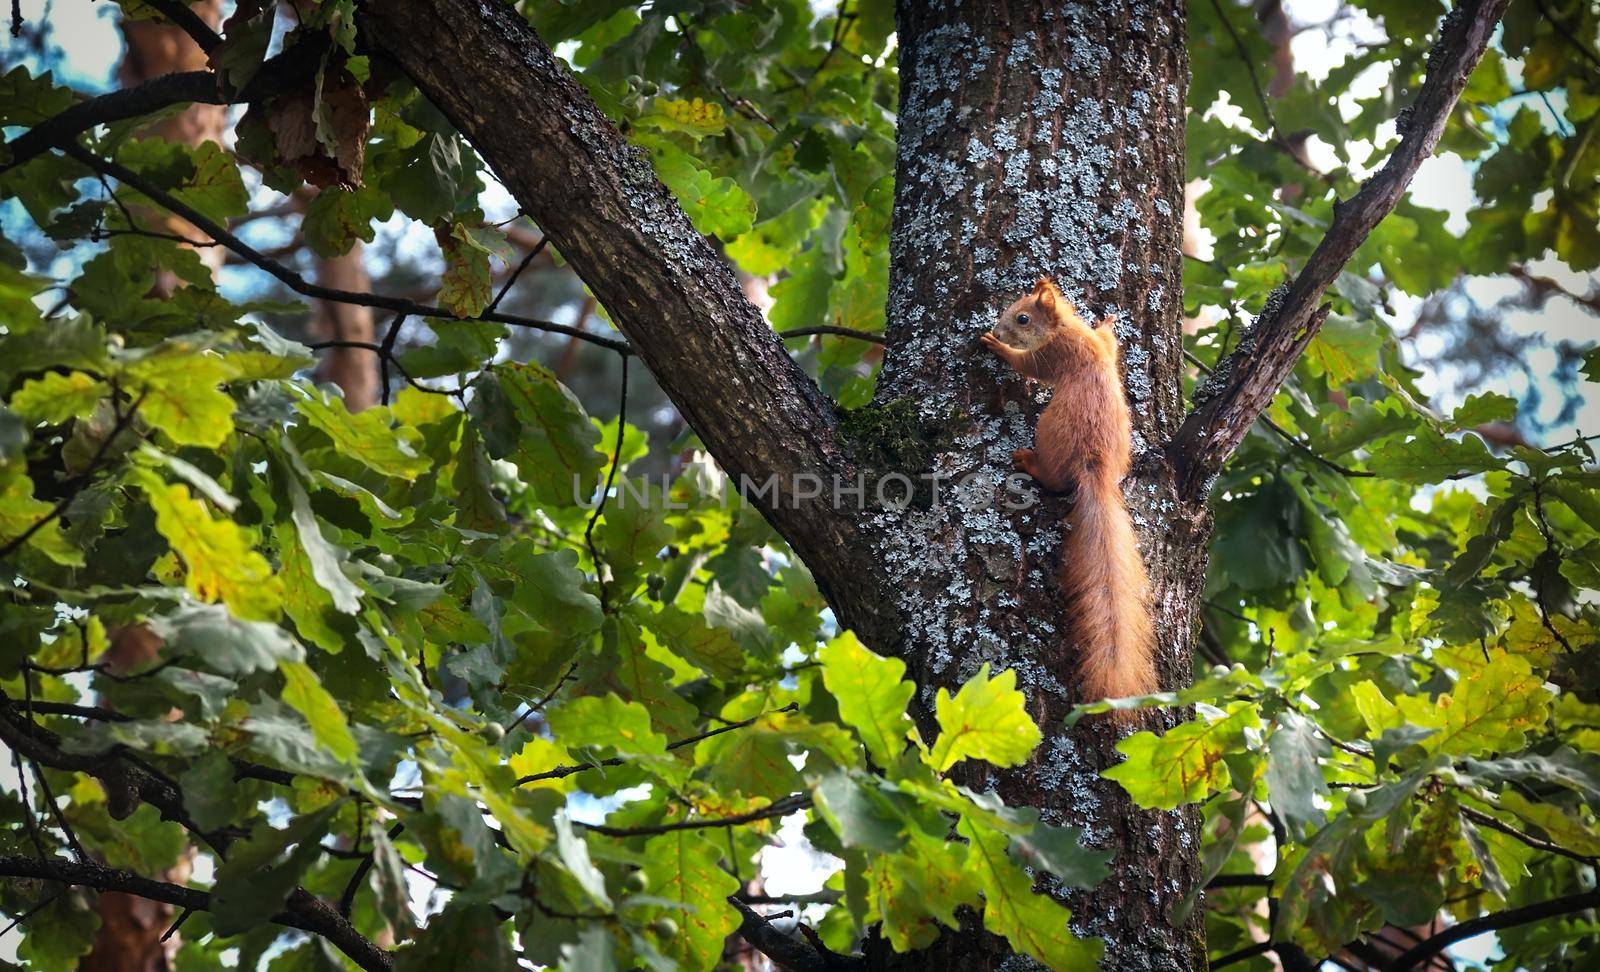 Squirrel on a tree trunk in the forest by georgina198